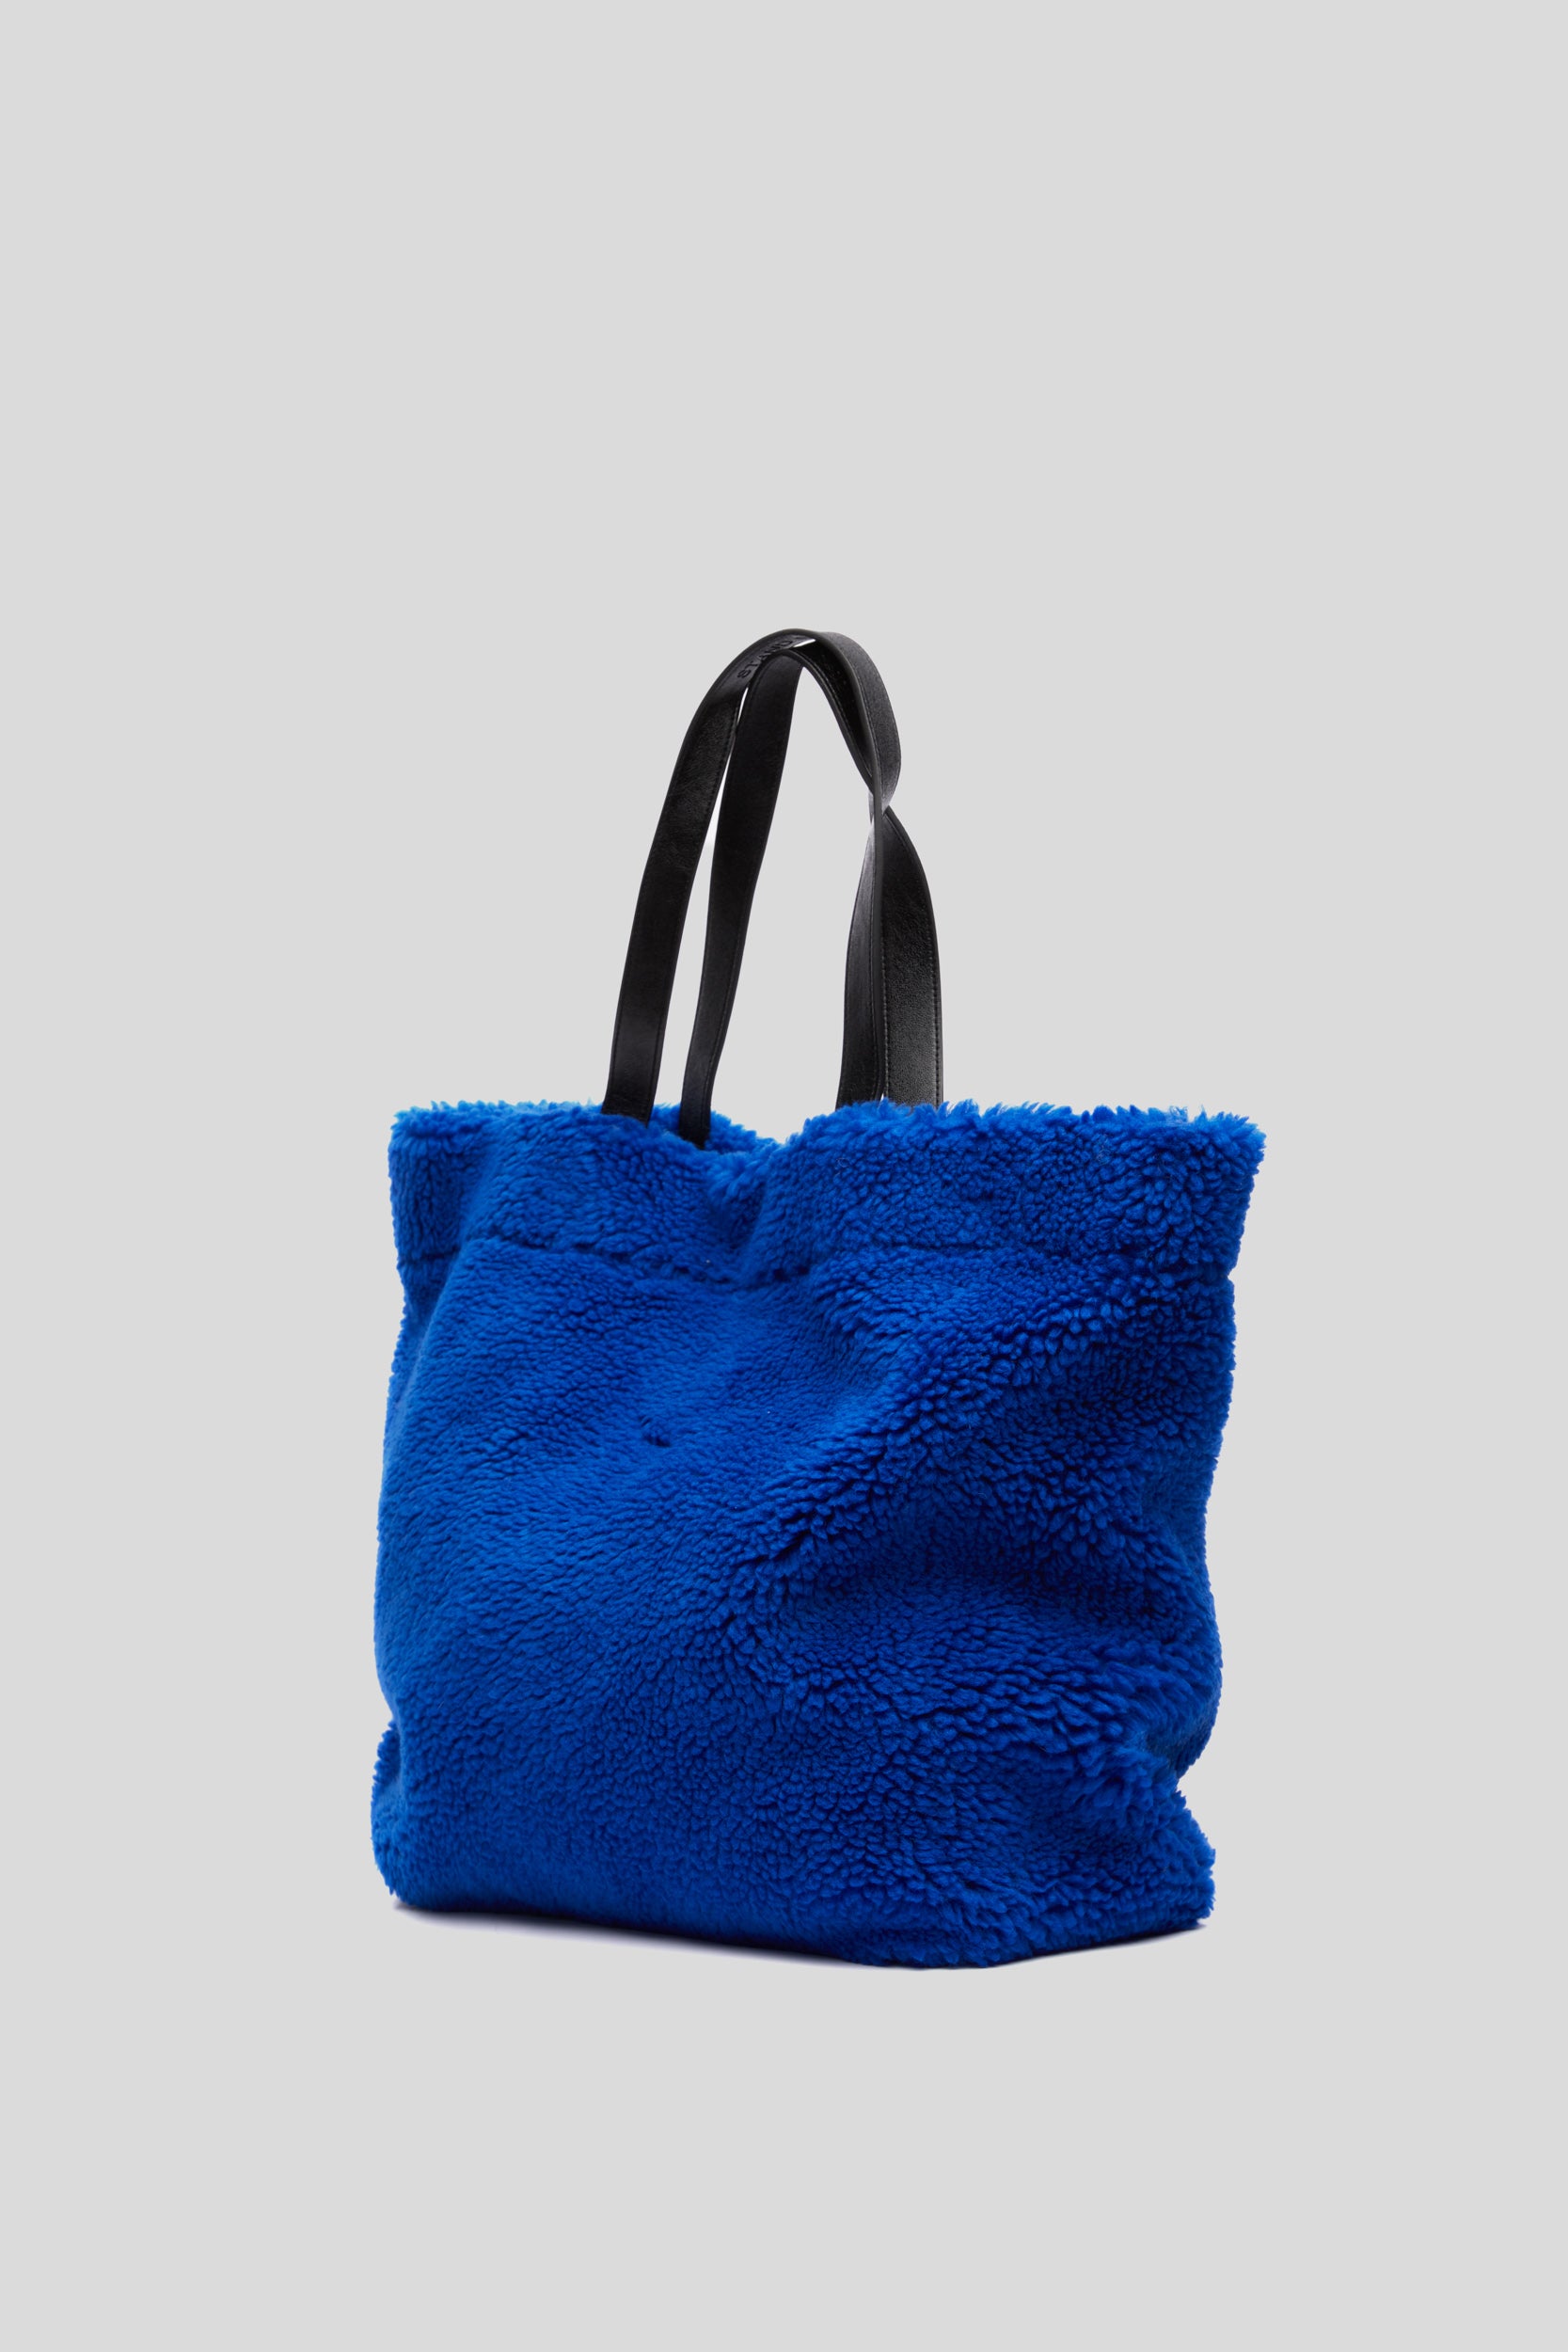 STAND STUDIO Electric Blue Shopping Bag